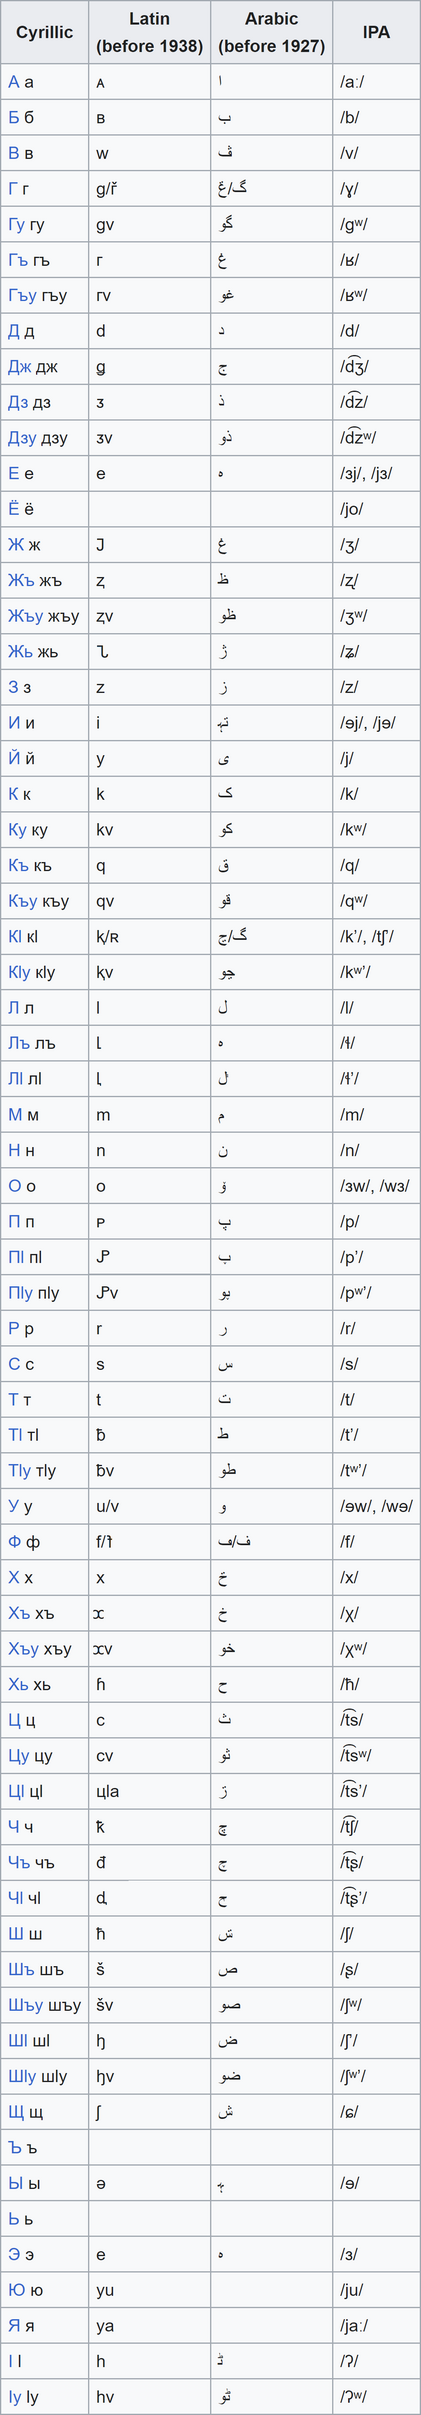 Adyghe language script history chart.png